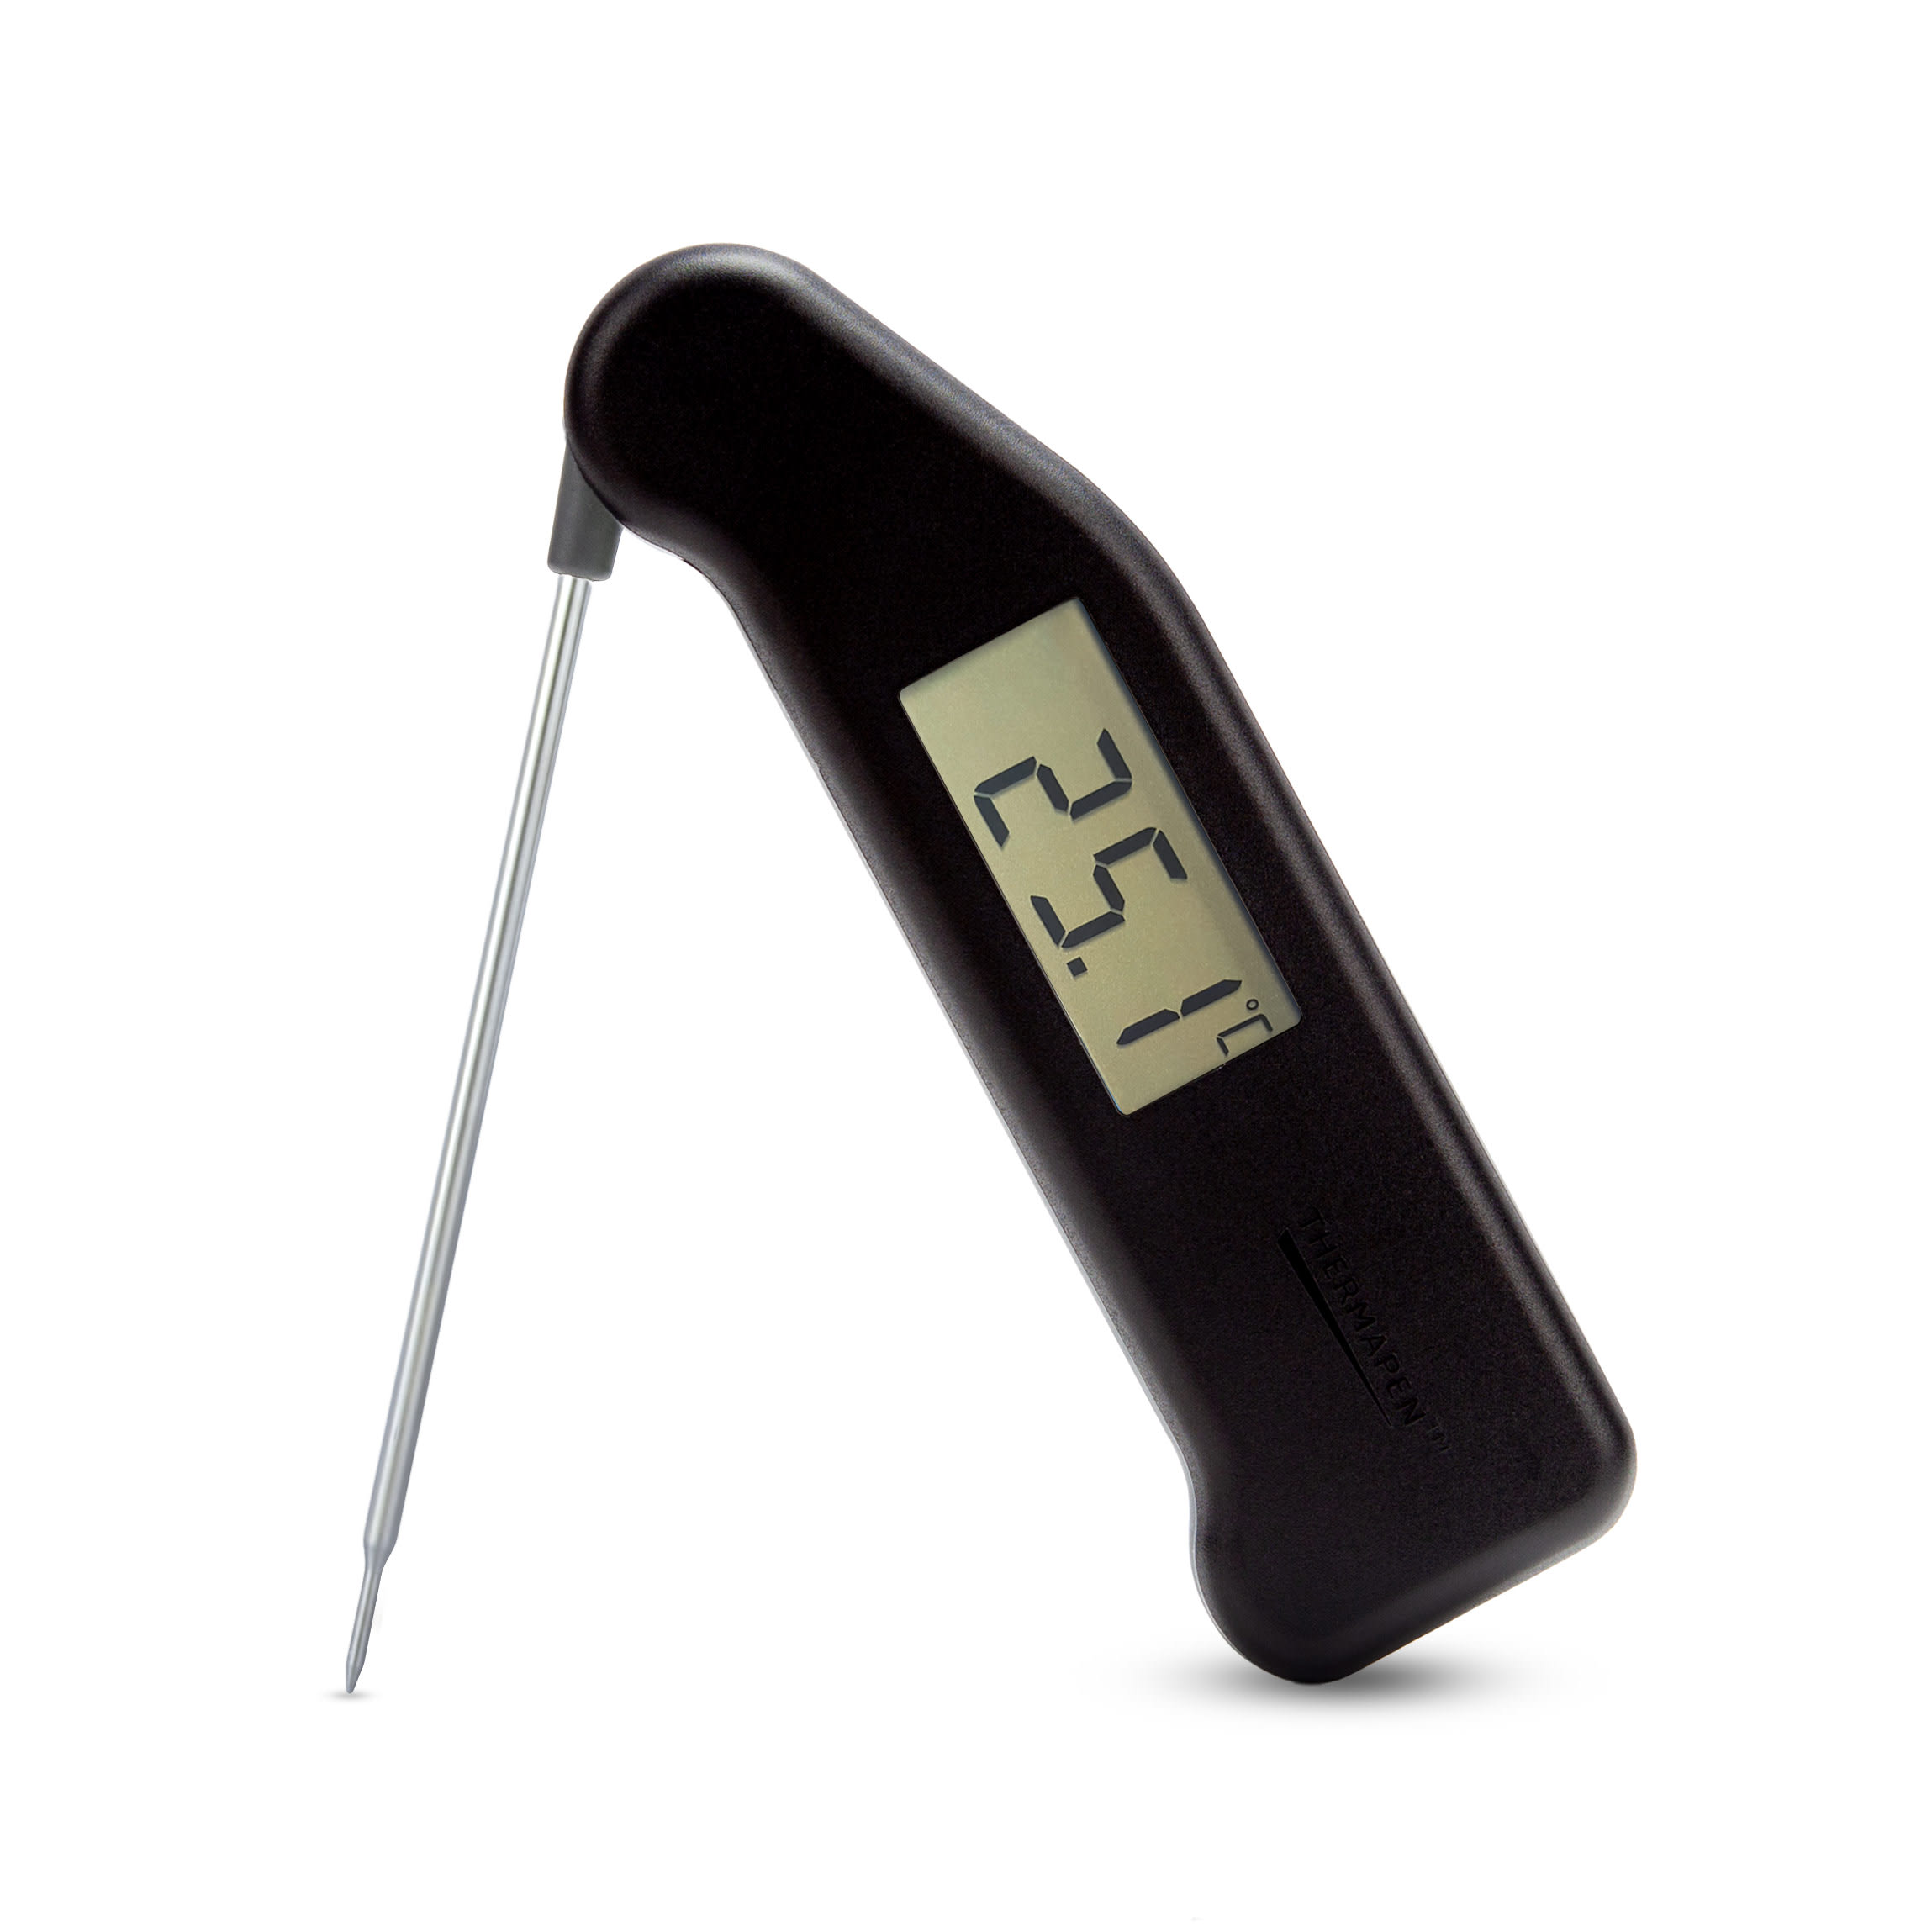 Electronic Thermometers - How Thermometers Work